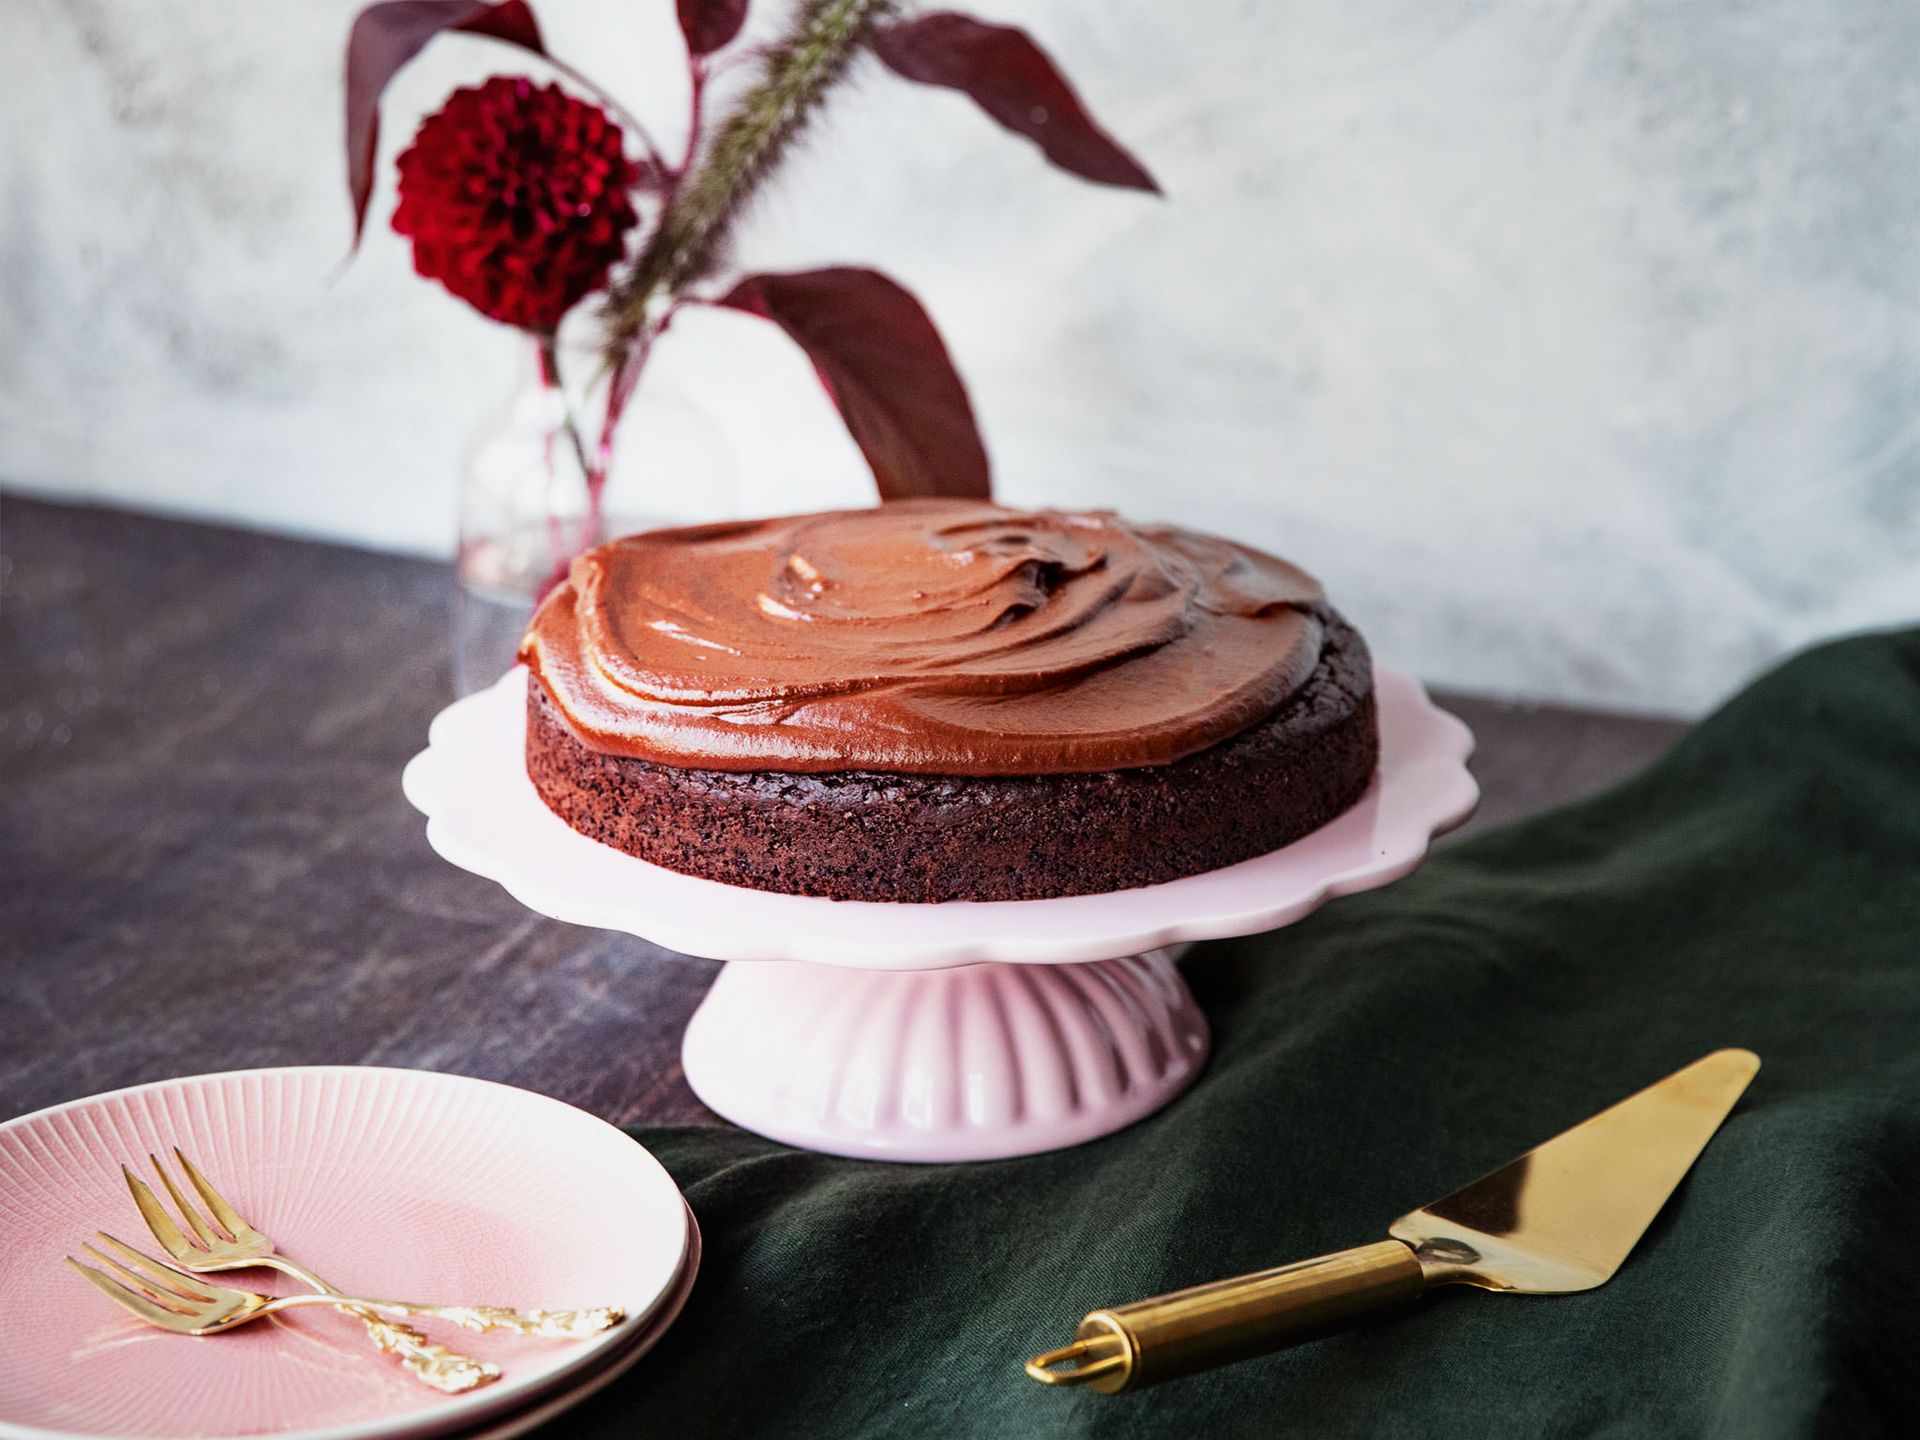 Double chocolate cake with sweet potato frosting